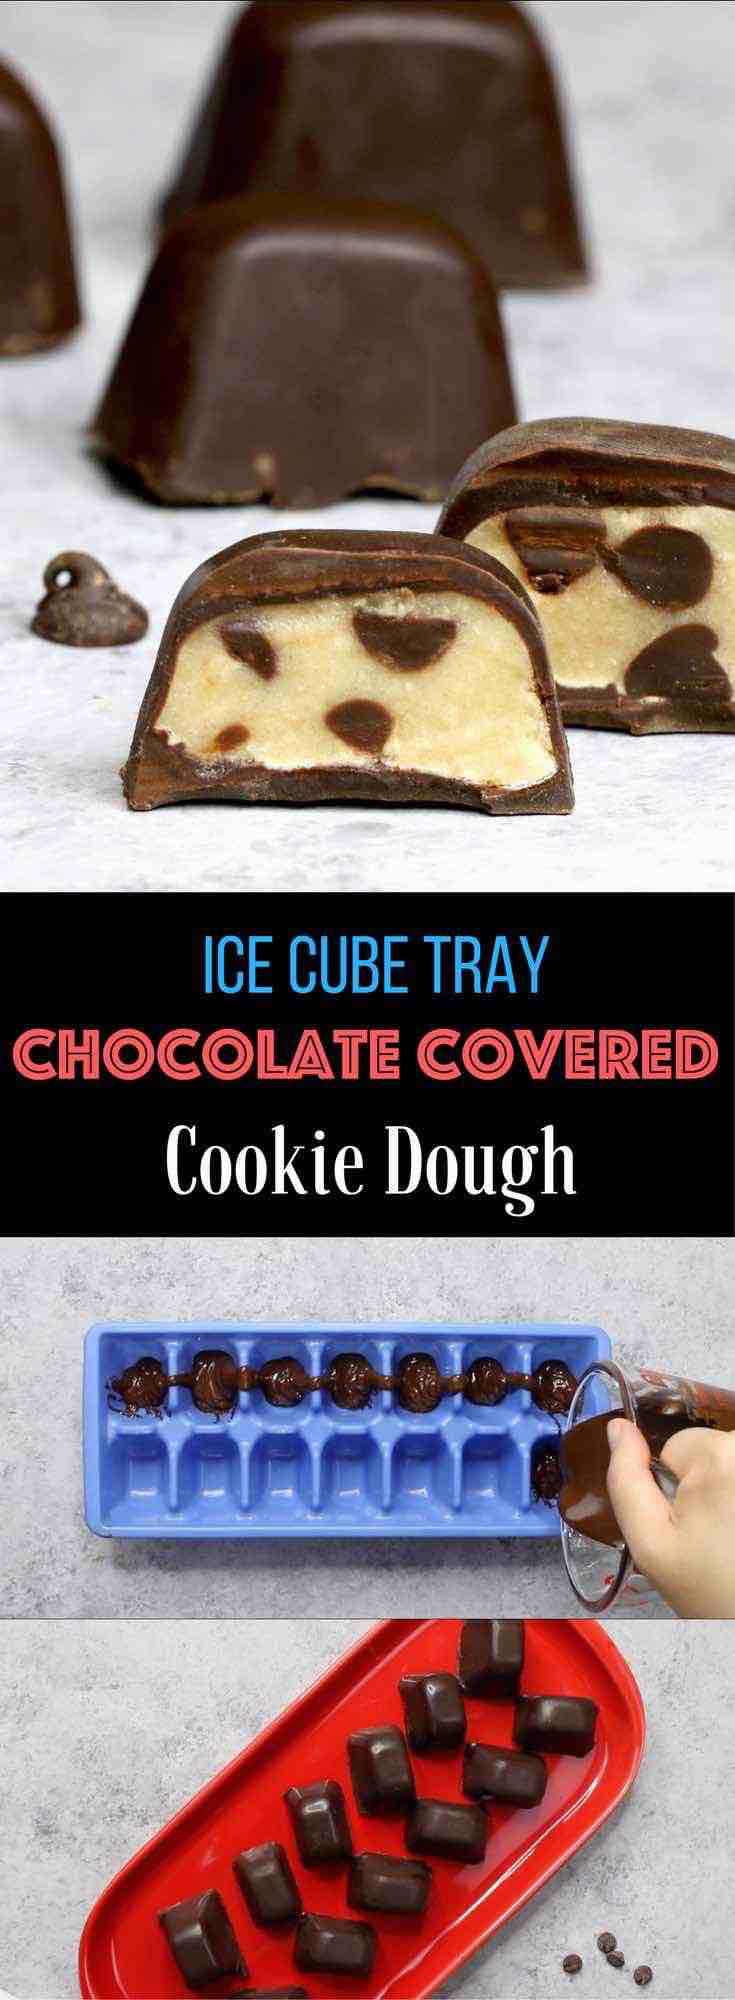 Chocolate Covered Cookie Dough Bites – Easy and delicious treats that everyone will love. So easy and fun to make using an ice cube tray! All you need is a few simple ingredients: chocolate, flour, brown sugar, chocolate chips, vanilla, butter and salt. An easy recipe that makes a great finger food dessert for parties, brunch, or as an afternoon snack! Homemade gifts. Party food, no bake, party dessert recipes. Video recipe. 